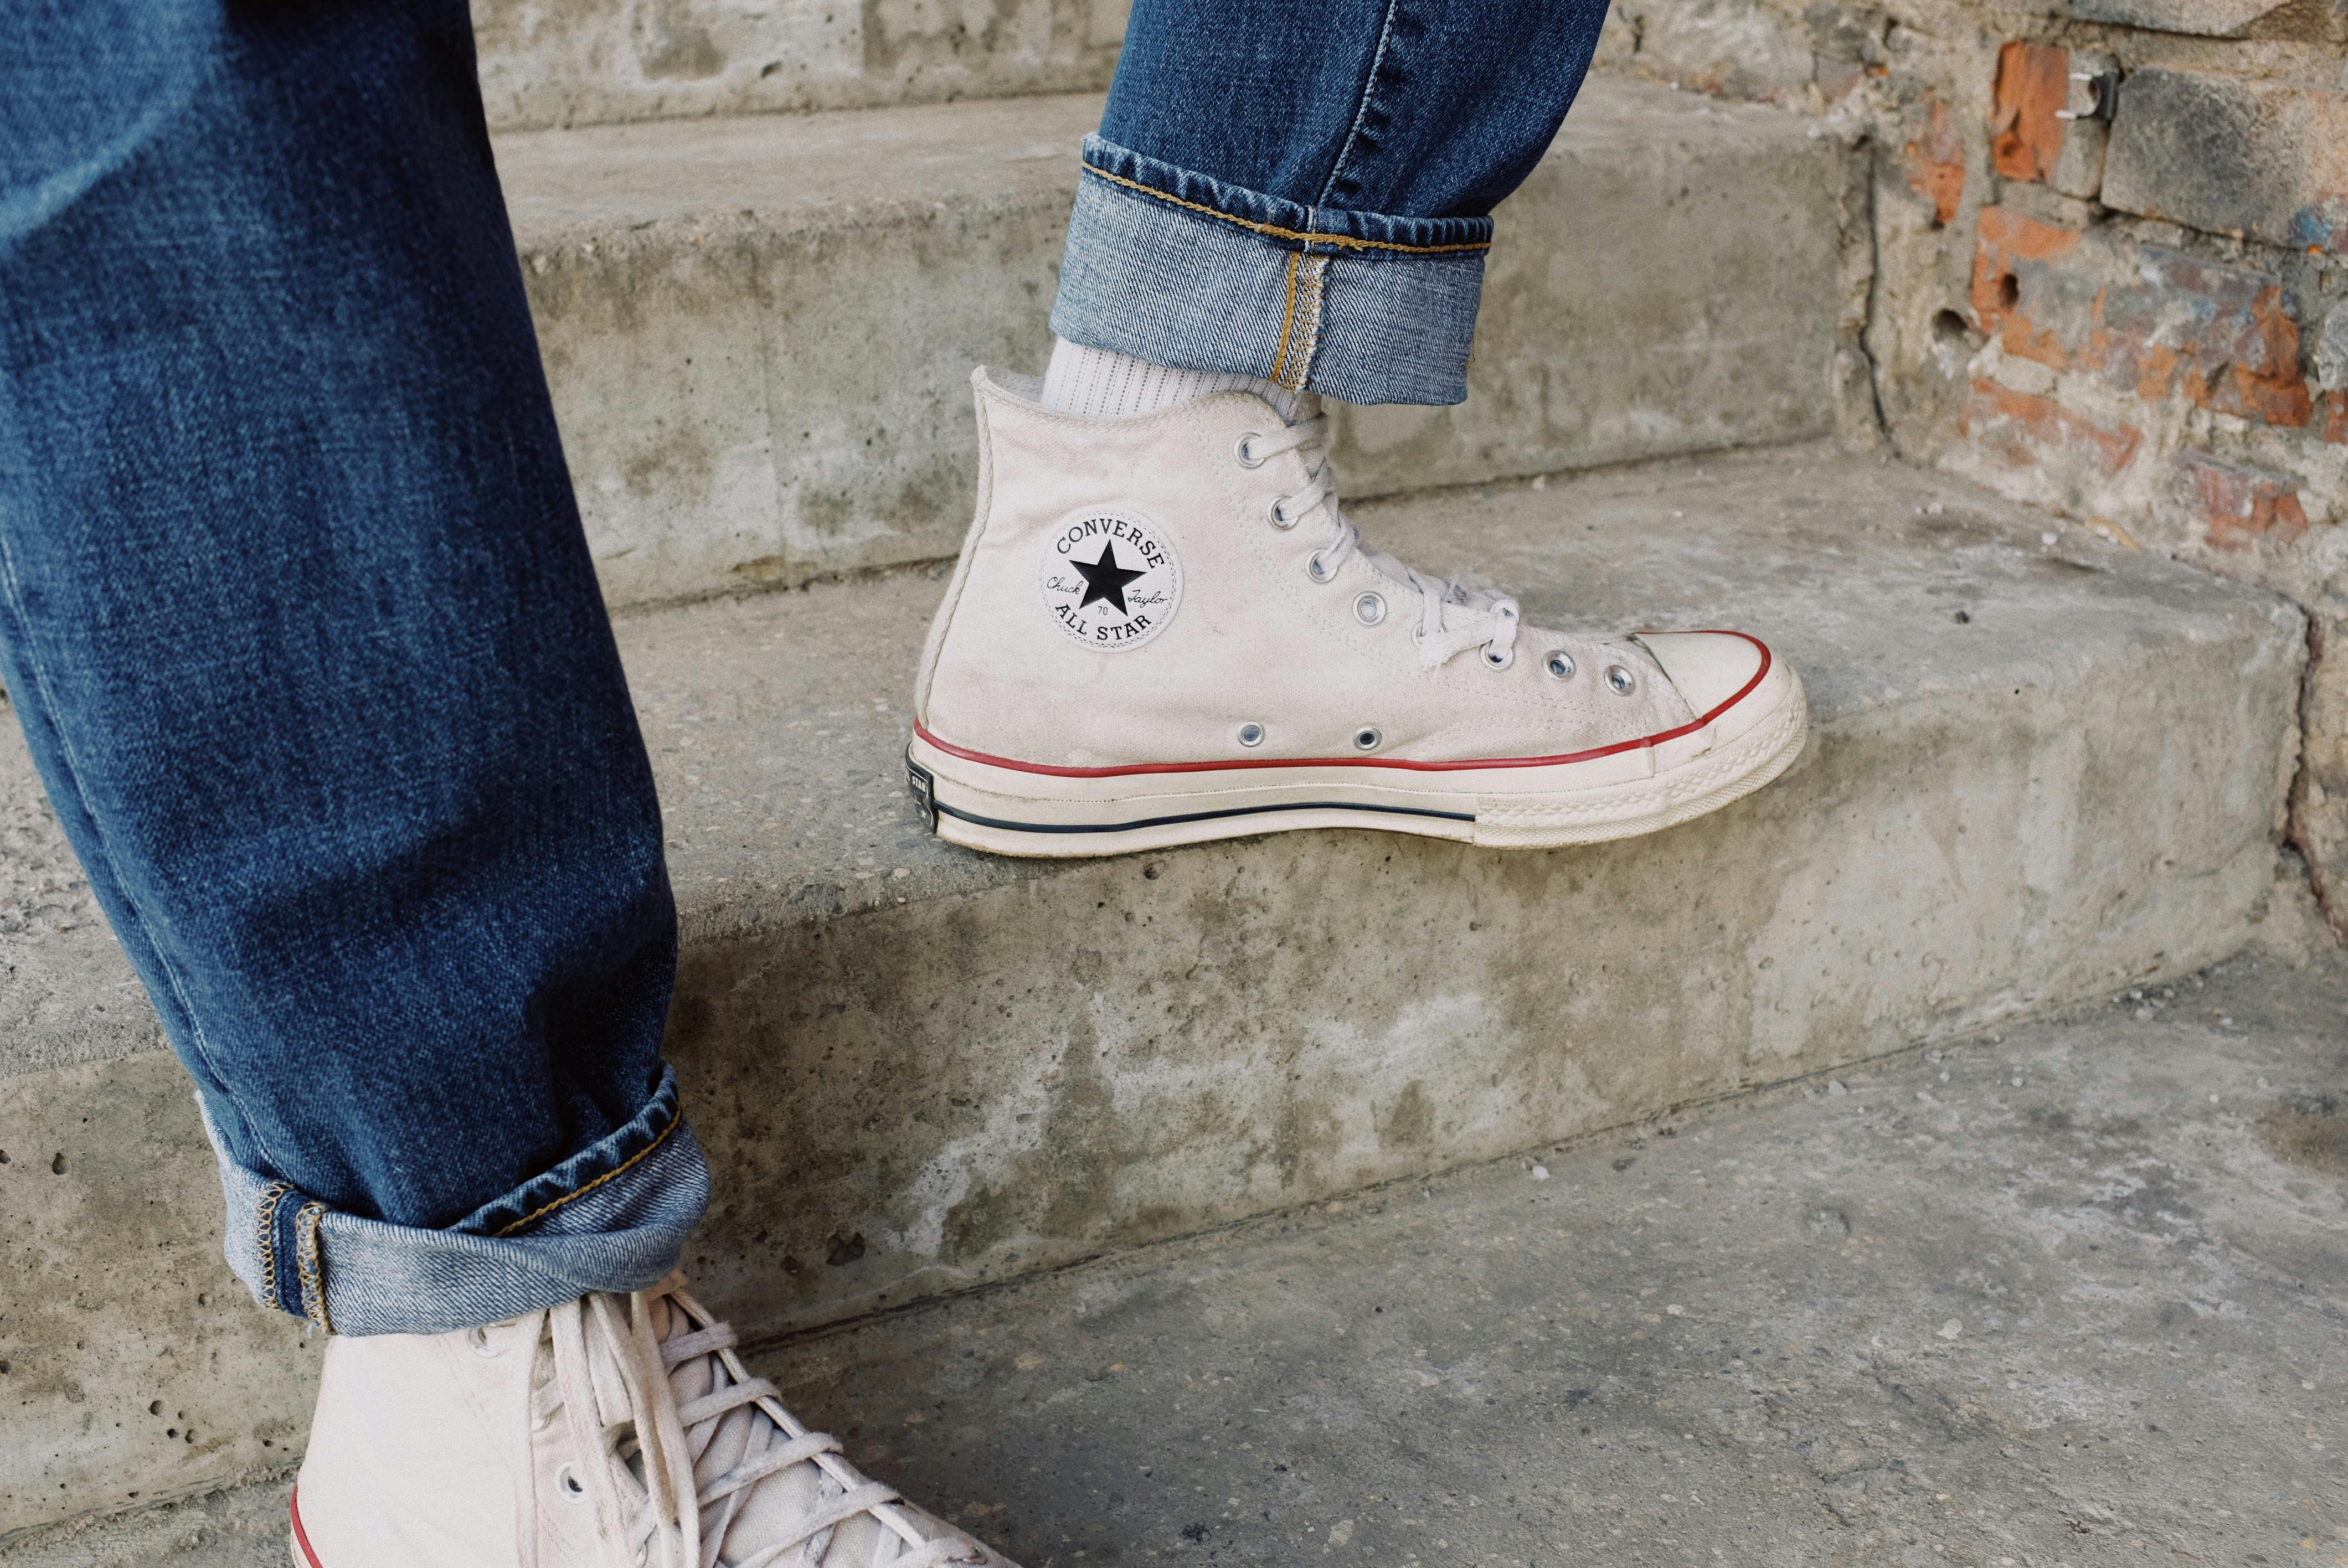 Person in Blue Denim Jeans Wearing White Converse Sneakers · Free Stock  Photo